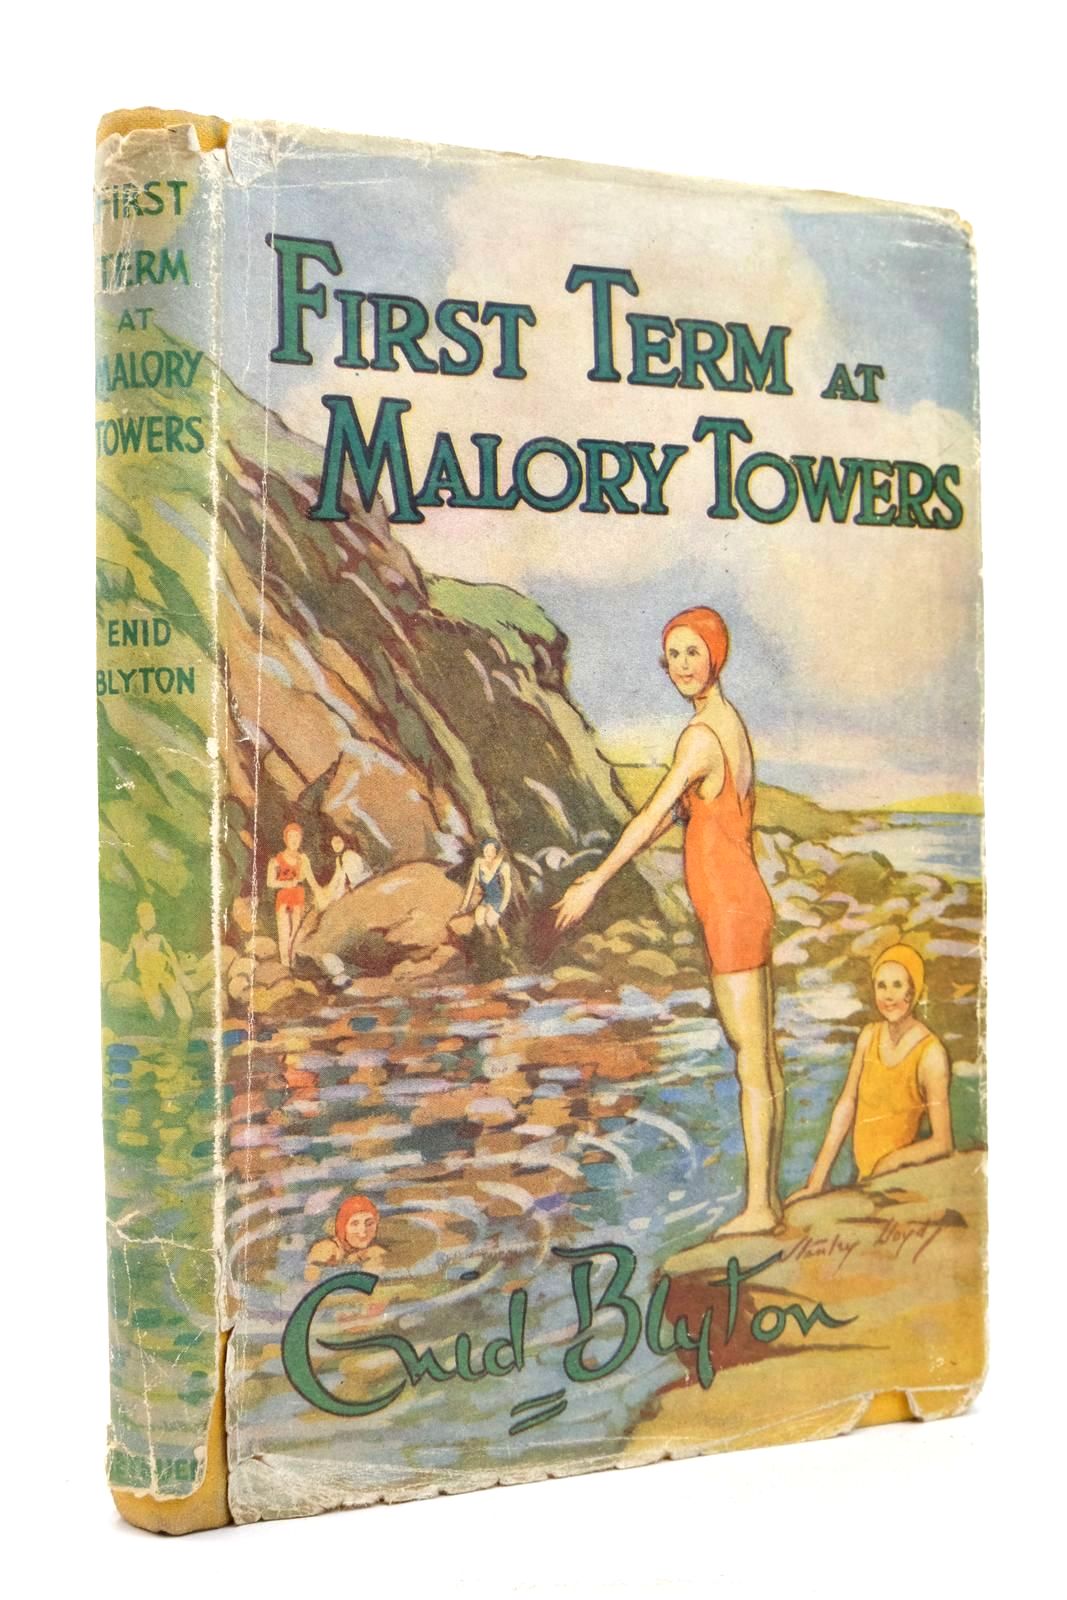 Photo of FIRST TERM AT MALORY TOWERS written by Blyton, Enid illustrated by Lloyd, Stanley published by Methuen & Co. Ltd. (STOCK CODE: 2137440)  for sale by Stella & Rose's Books